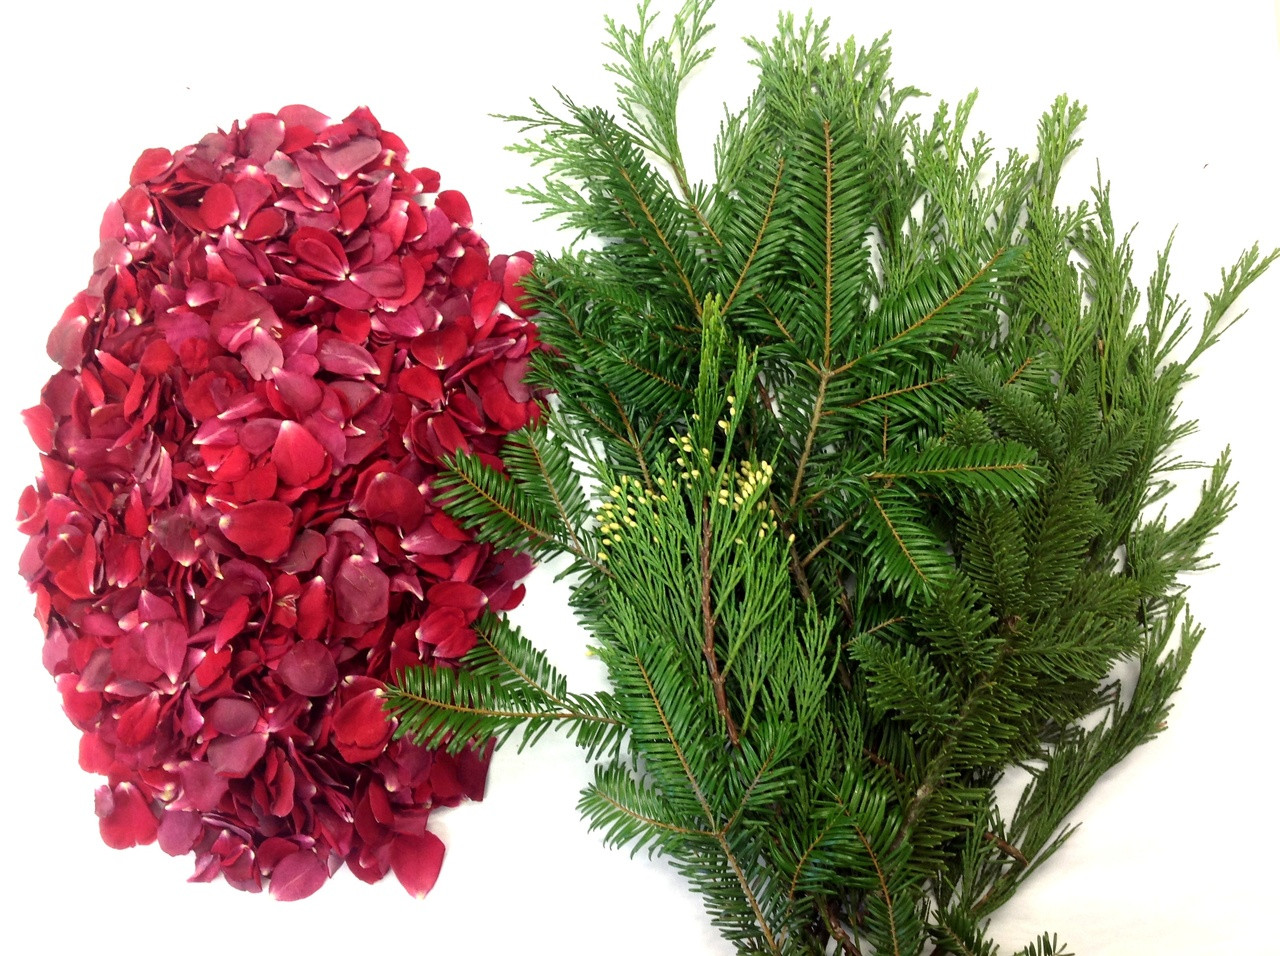 Mixed Christmas greens & Eco-friendly freeze dried red rose petals make up the Holiday Decorating Set